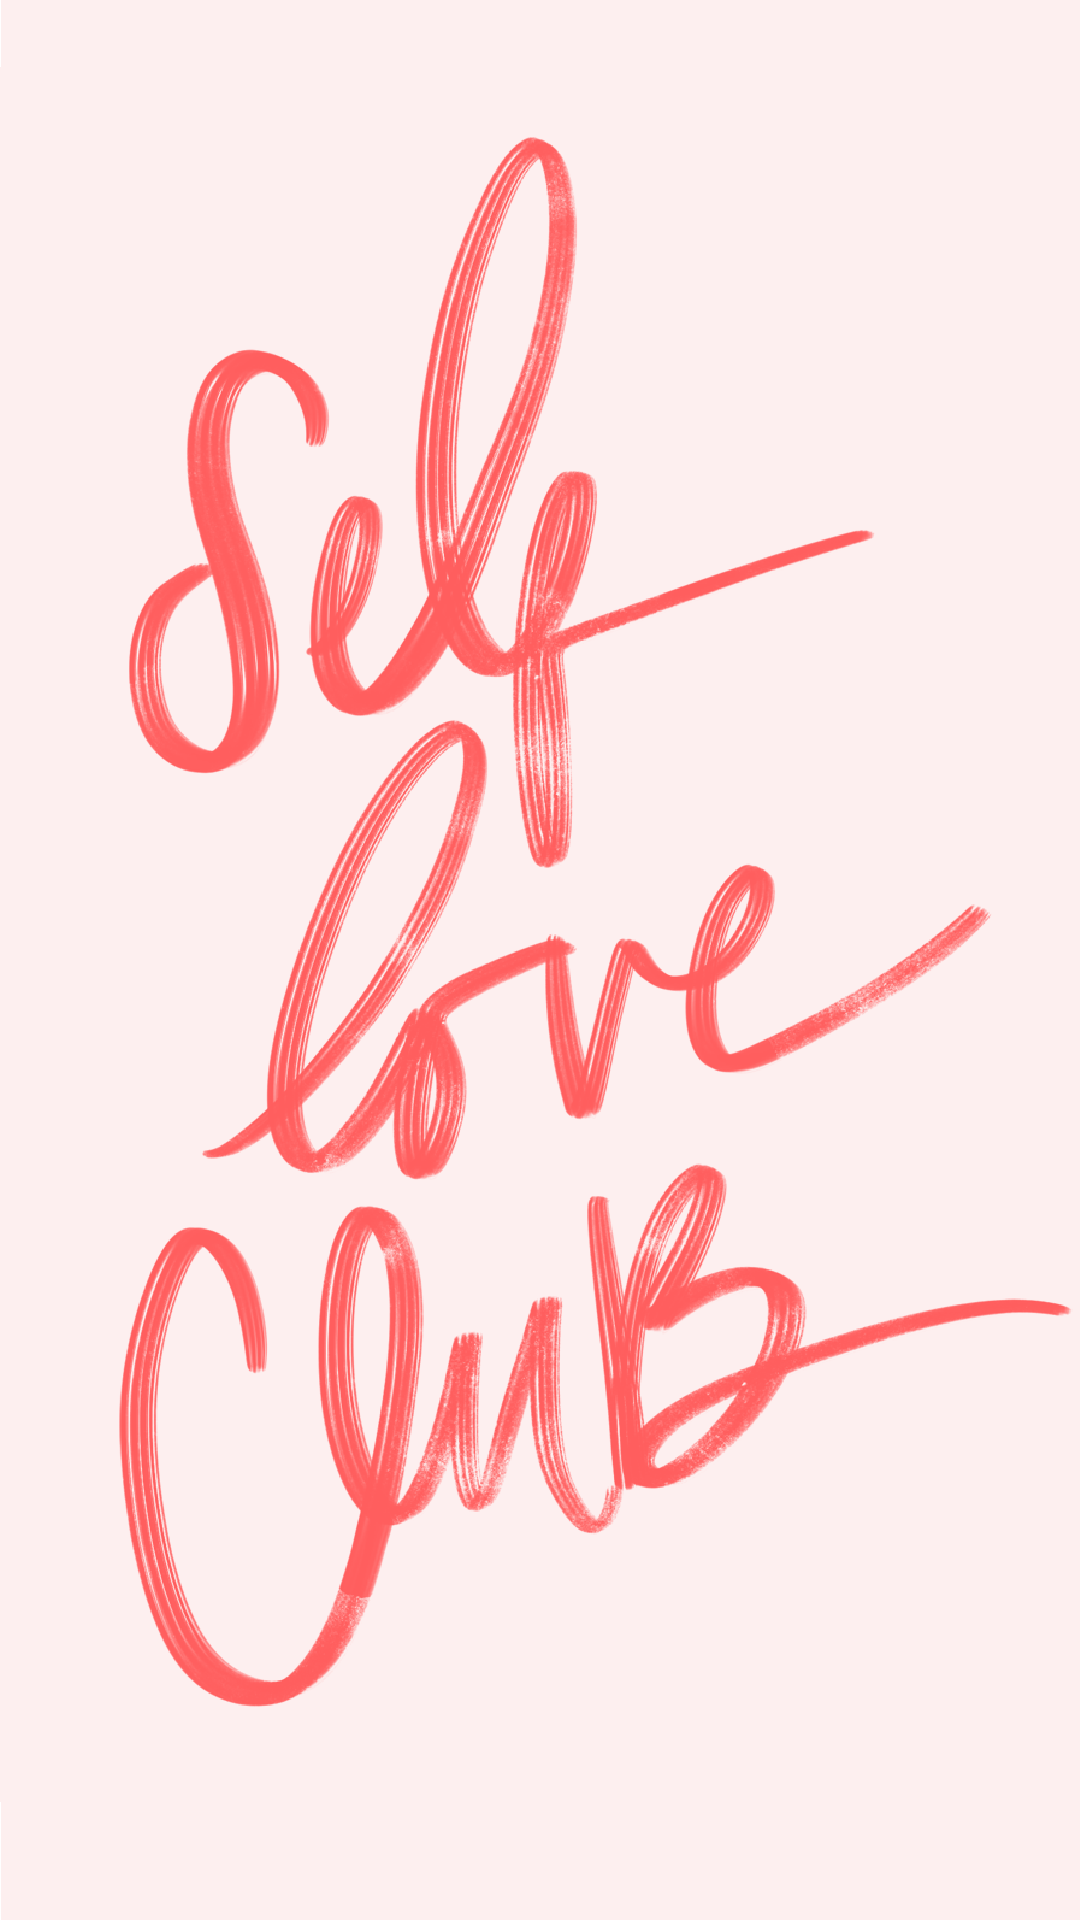 Self Love Wallpaper. Be yourself quotes, Quote